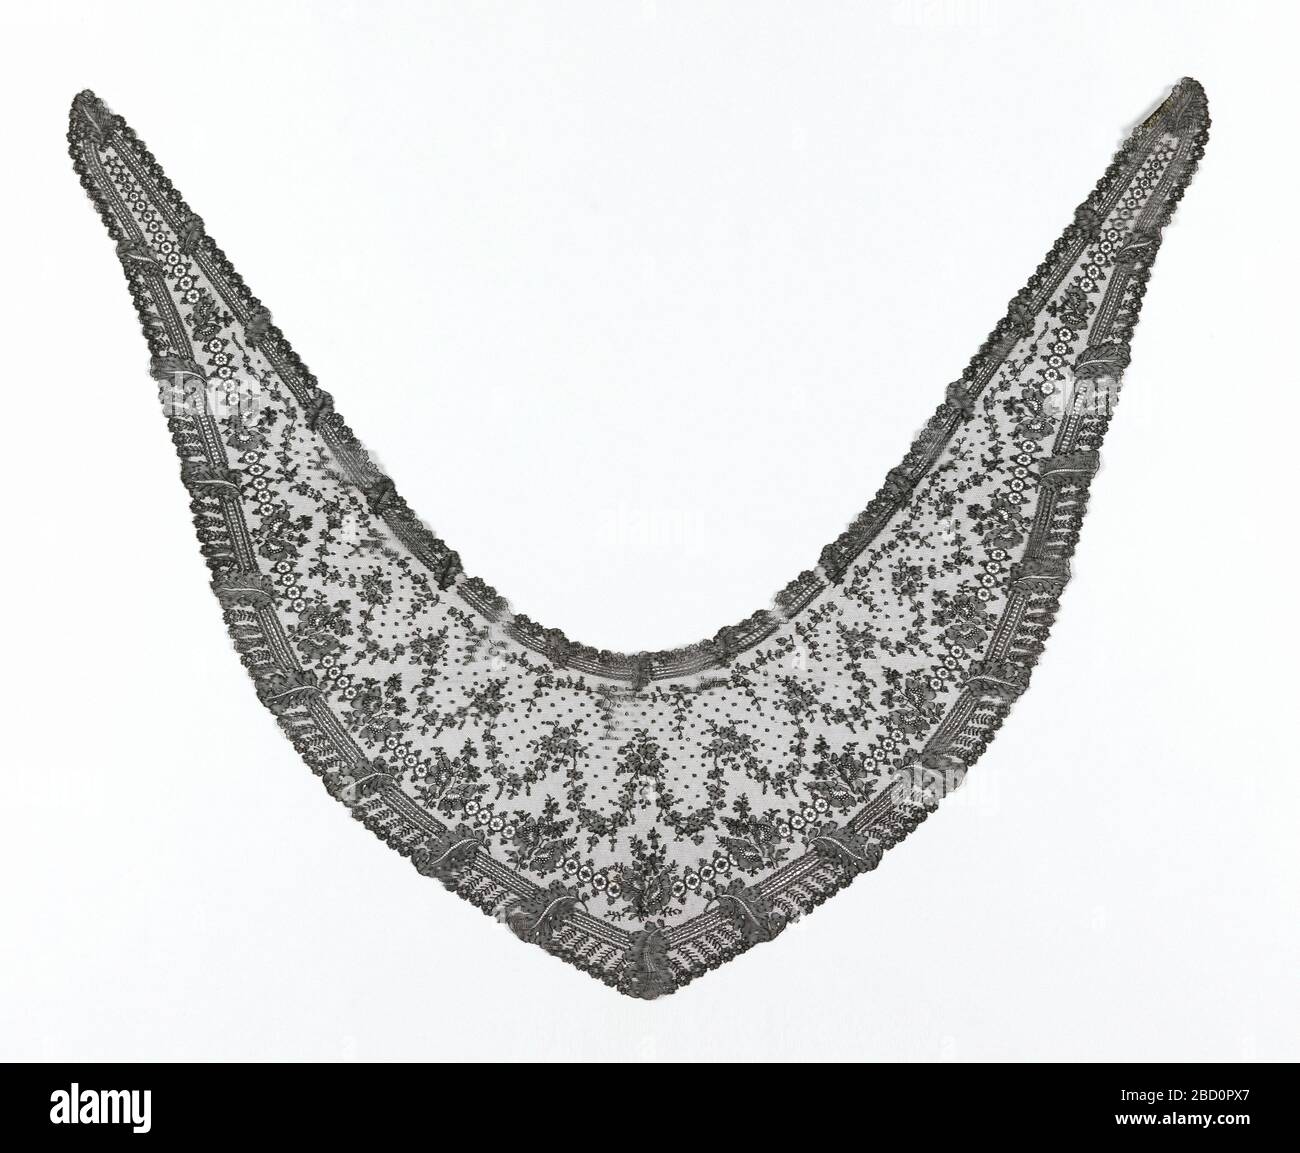 Head scarf. Research in ProgressShaped head scarf in black Chantilly lace showing pattern of garlands of floral sprays. Scarf outlined along edges by border motif of straight lines and repeated floral spray. Head scarf Stock Photo